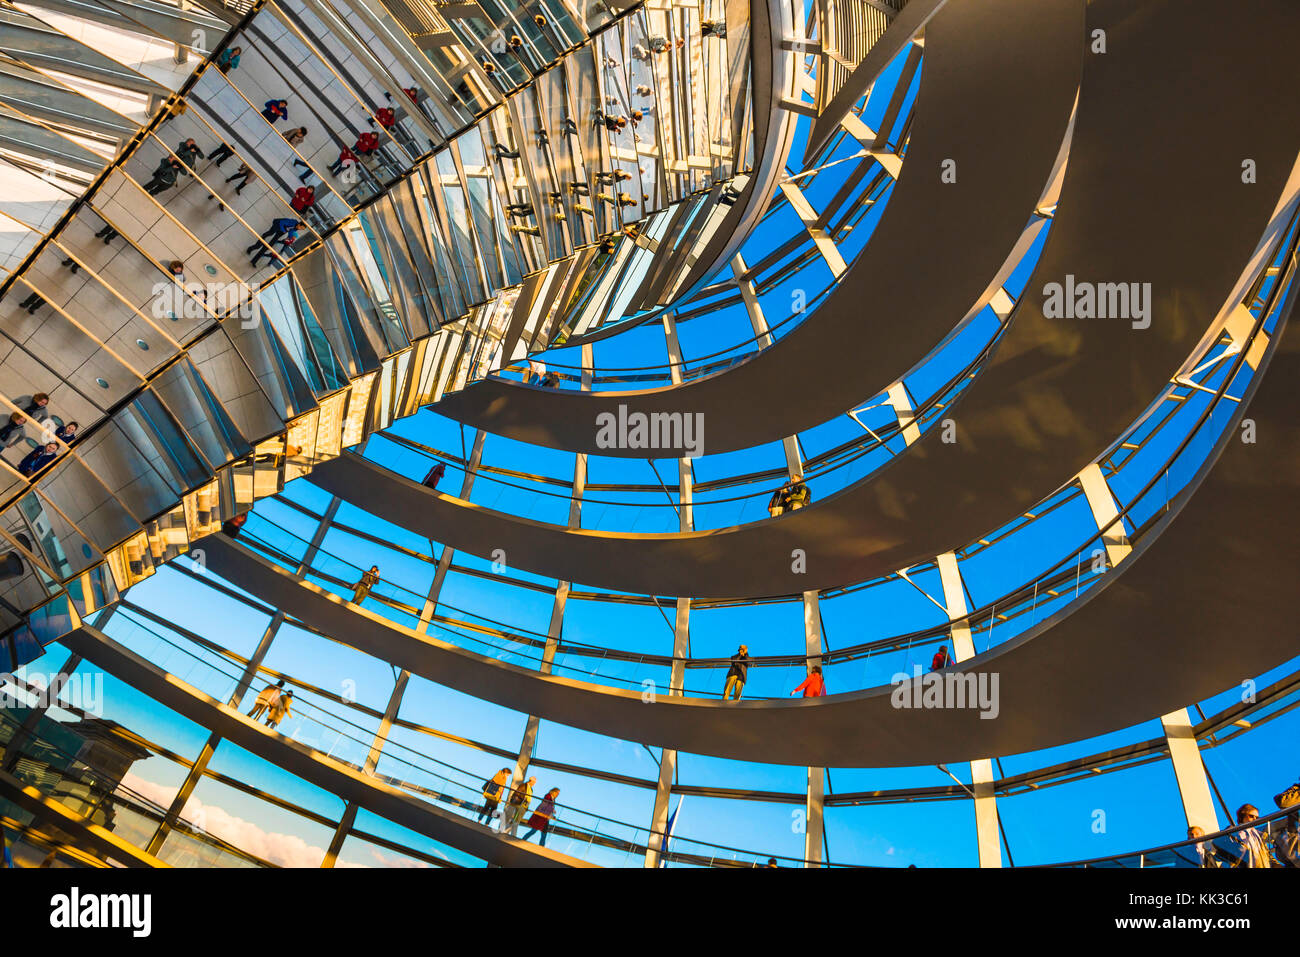 Modern Berlin, view of tourists walking on the spiral walkway inside the Norman Foster designed glass dome of the German parliament building, Berlin Stock Photo